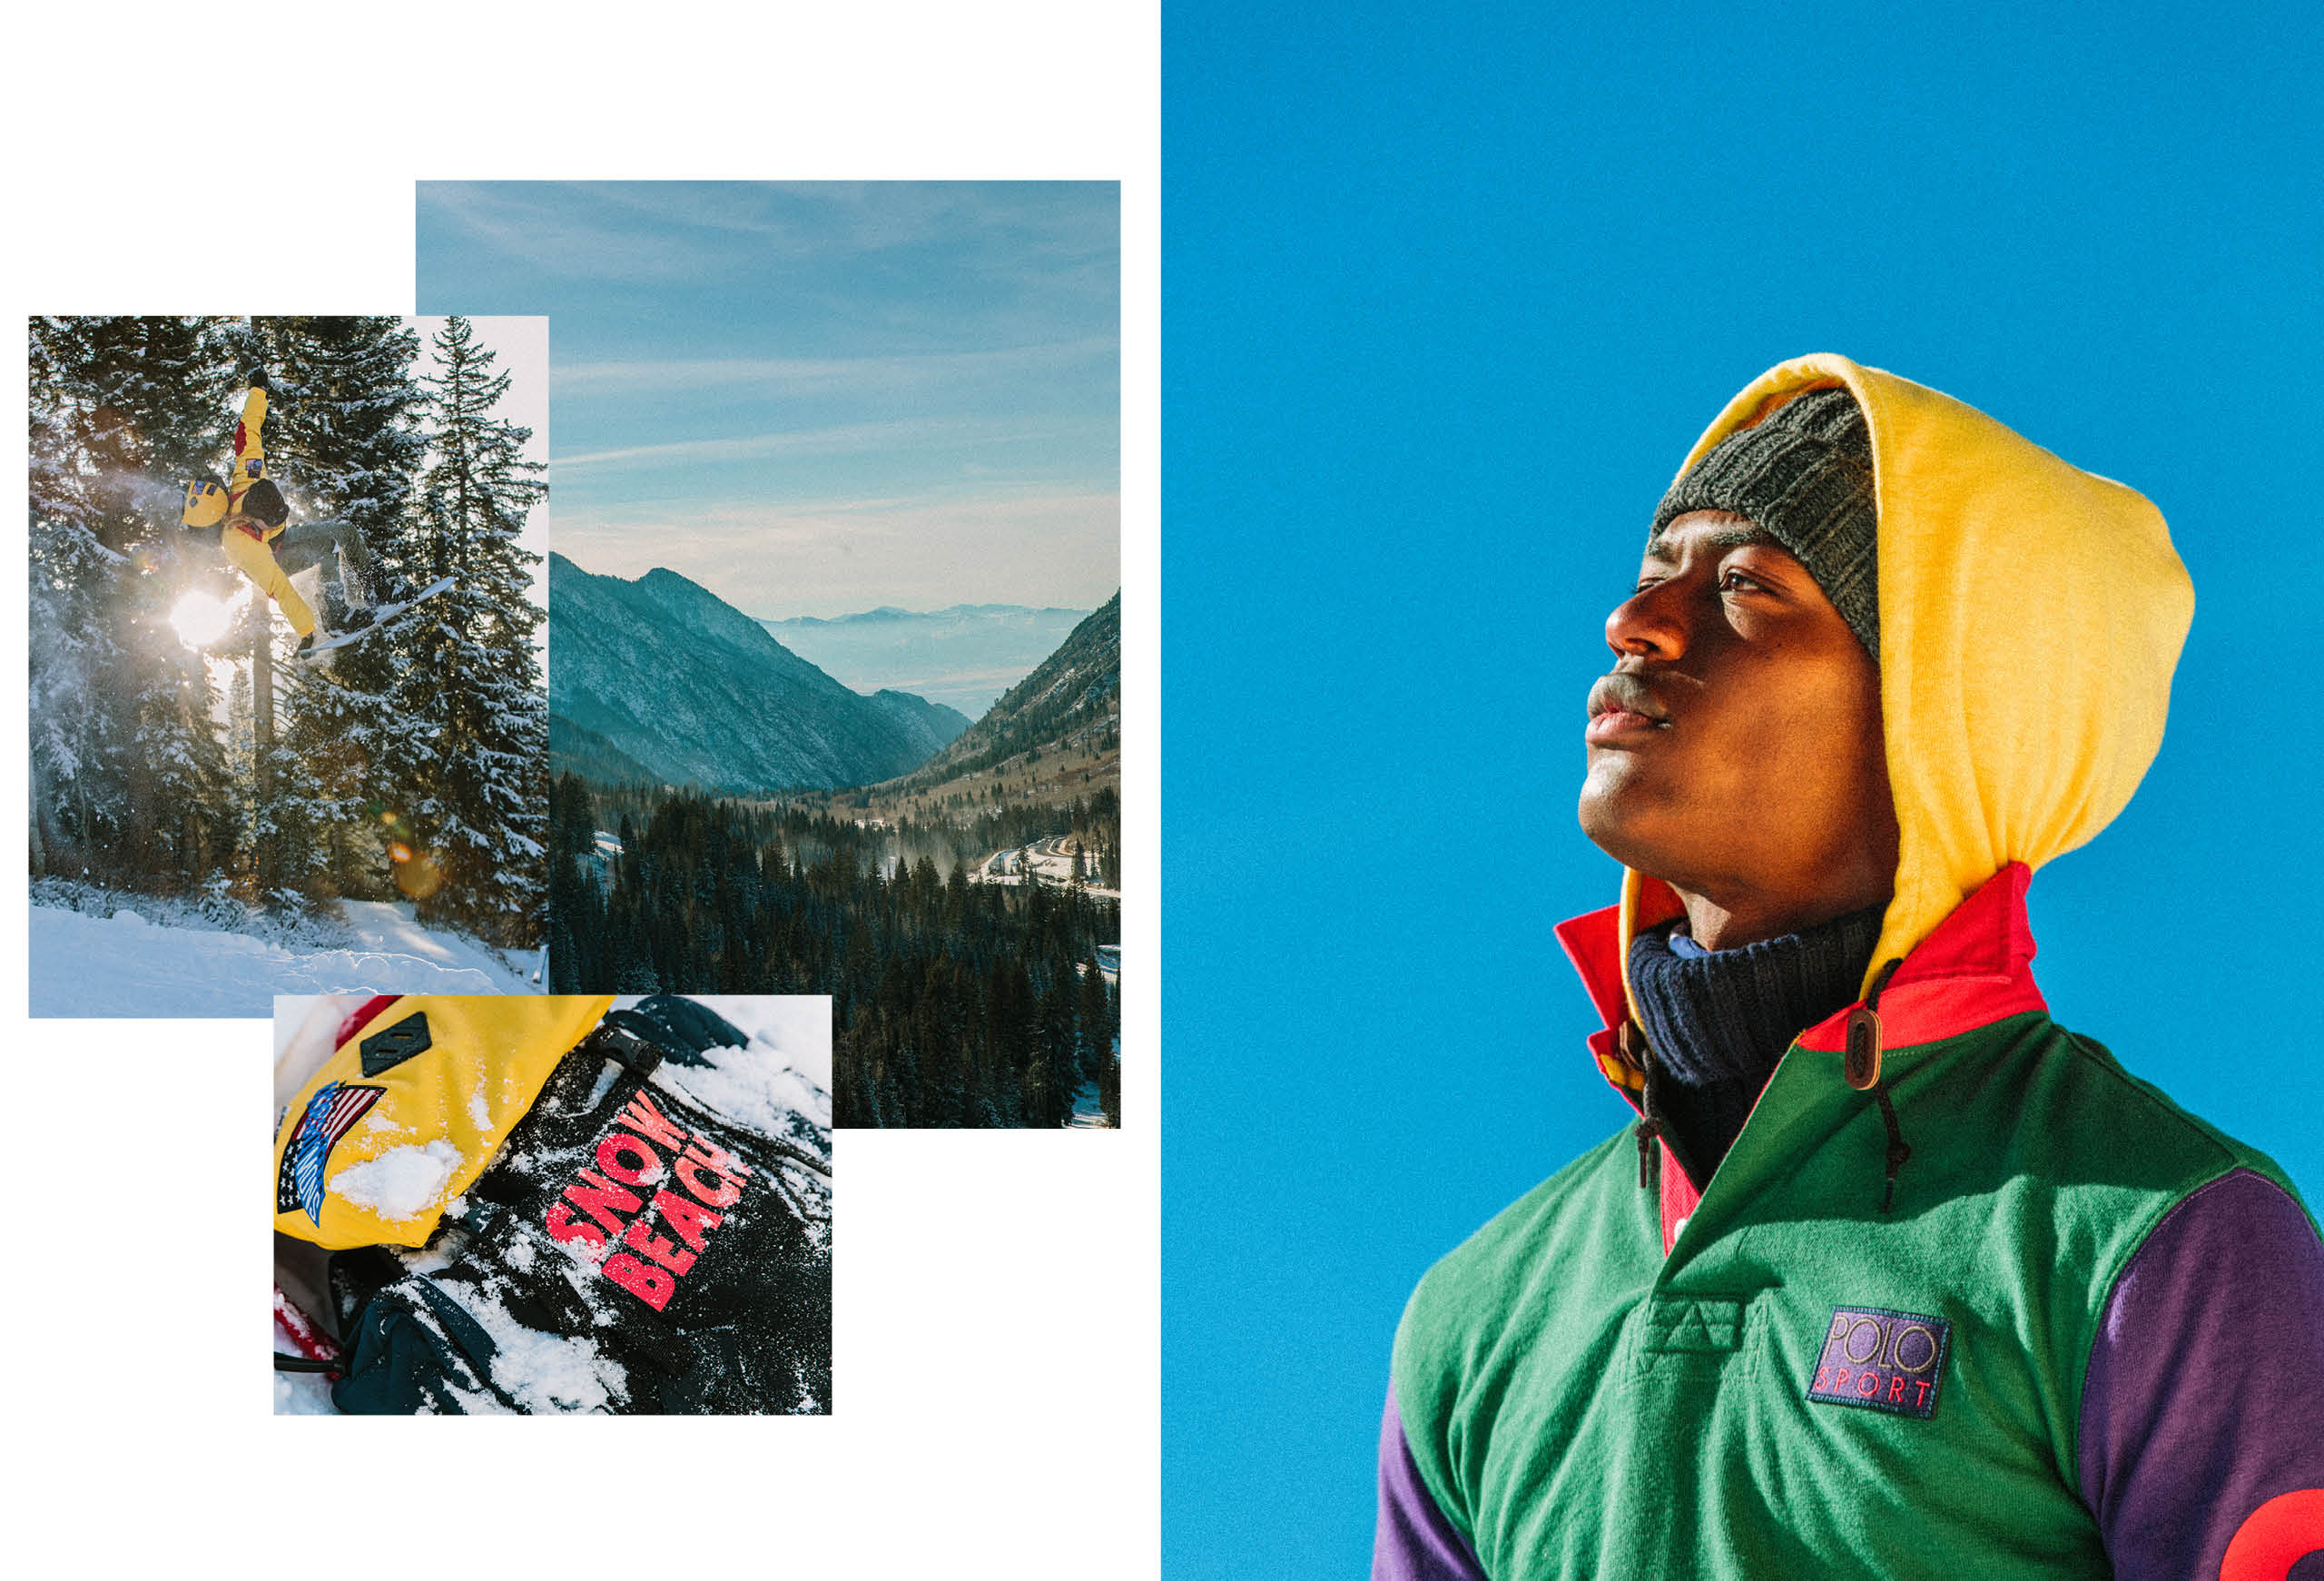 The 2018 Snow Beach campaign, featuring the Color and Black &amp; White collections